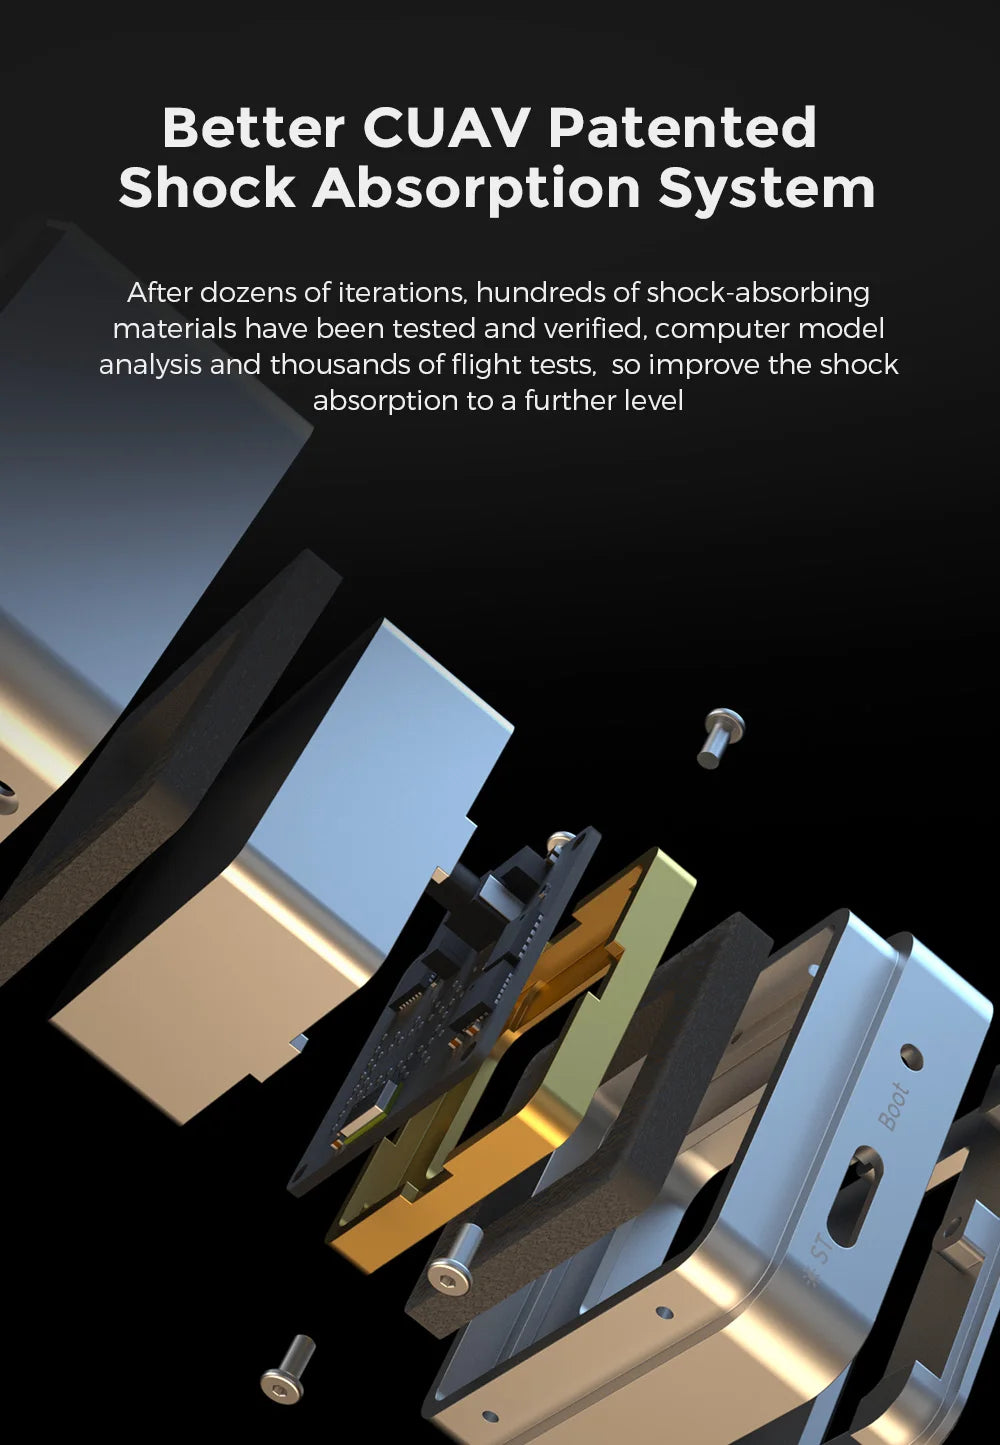 CUAV Patented Better Shock Absorption System . hundreds of iterations